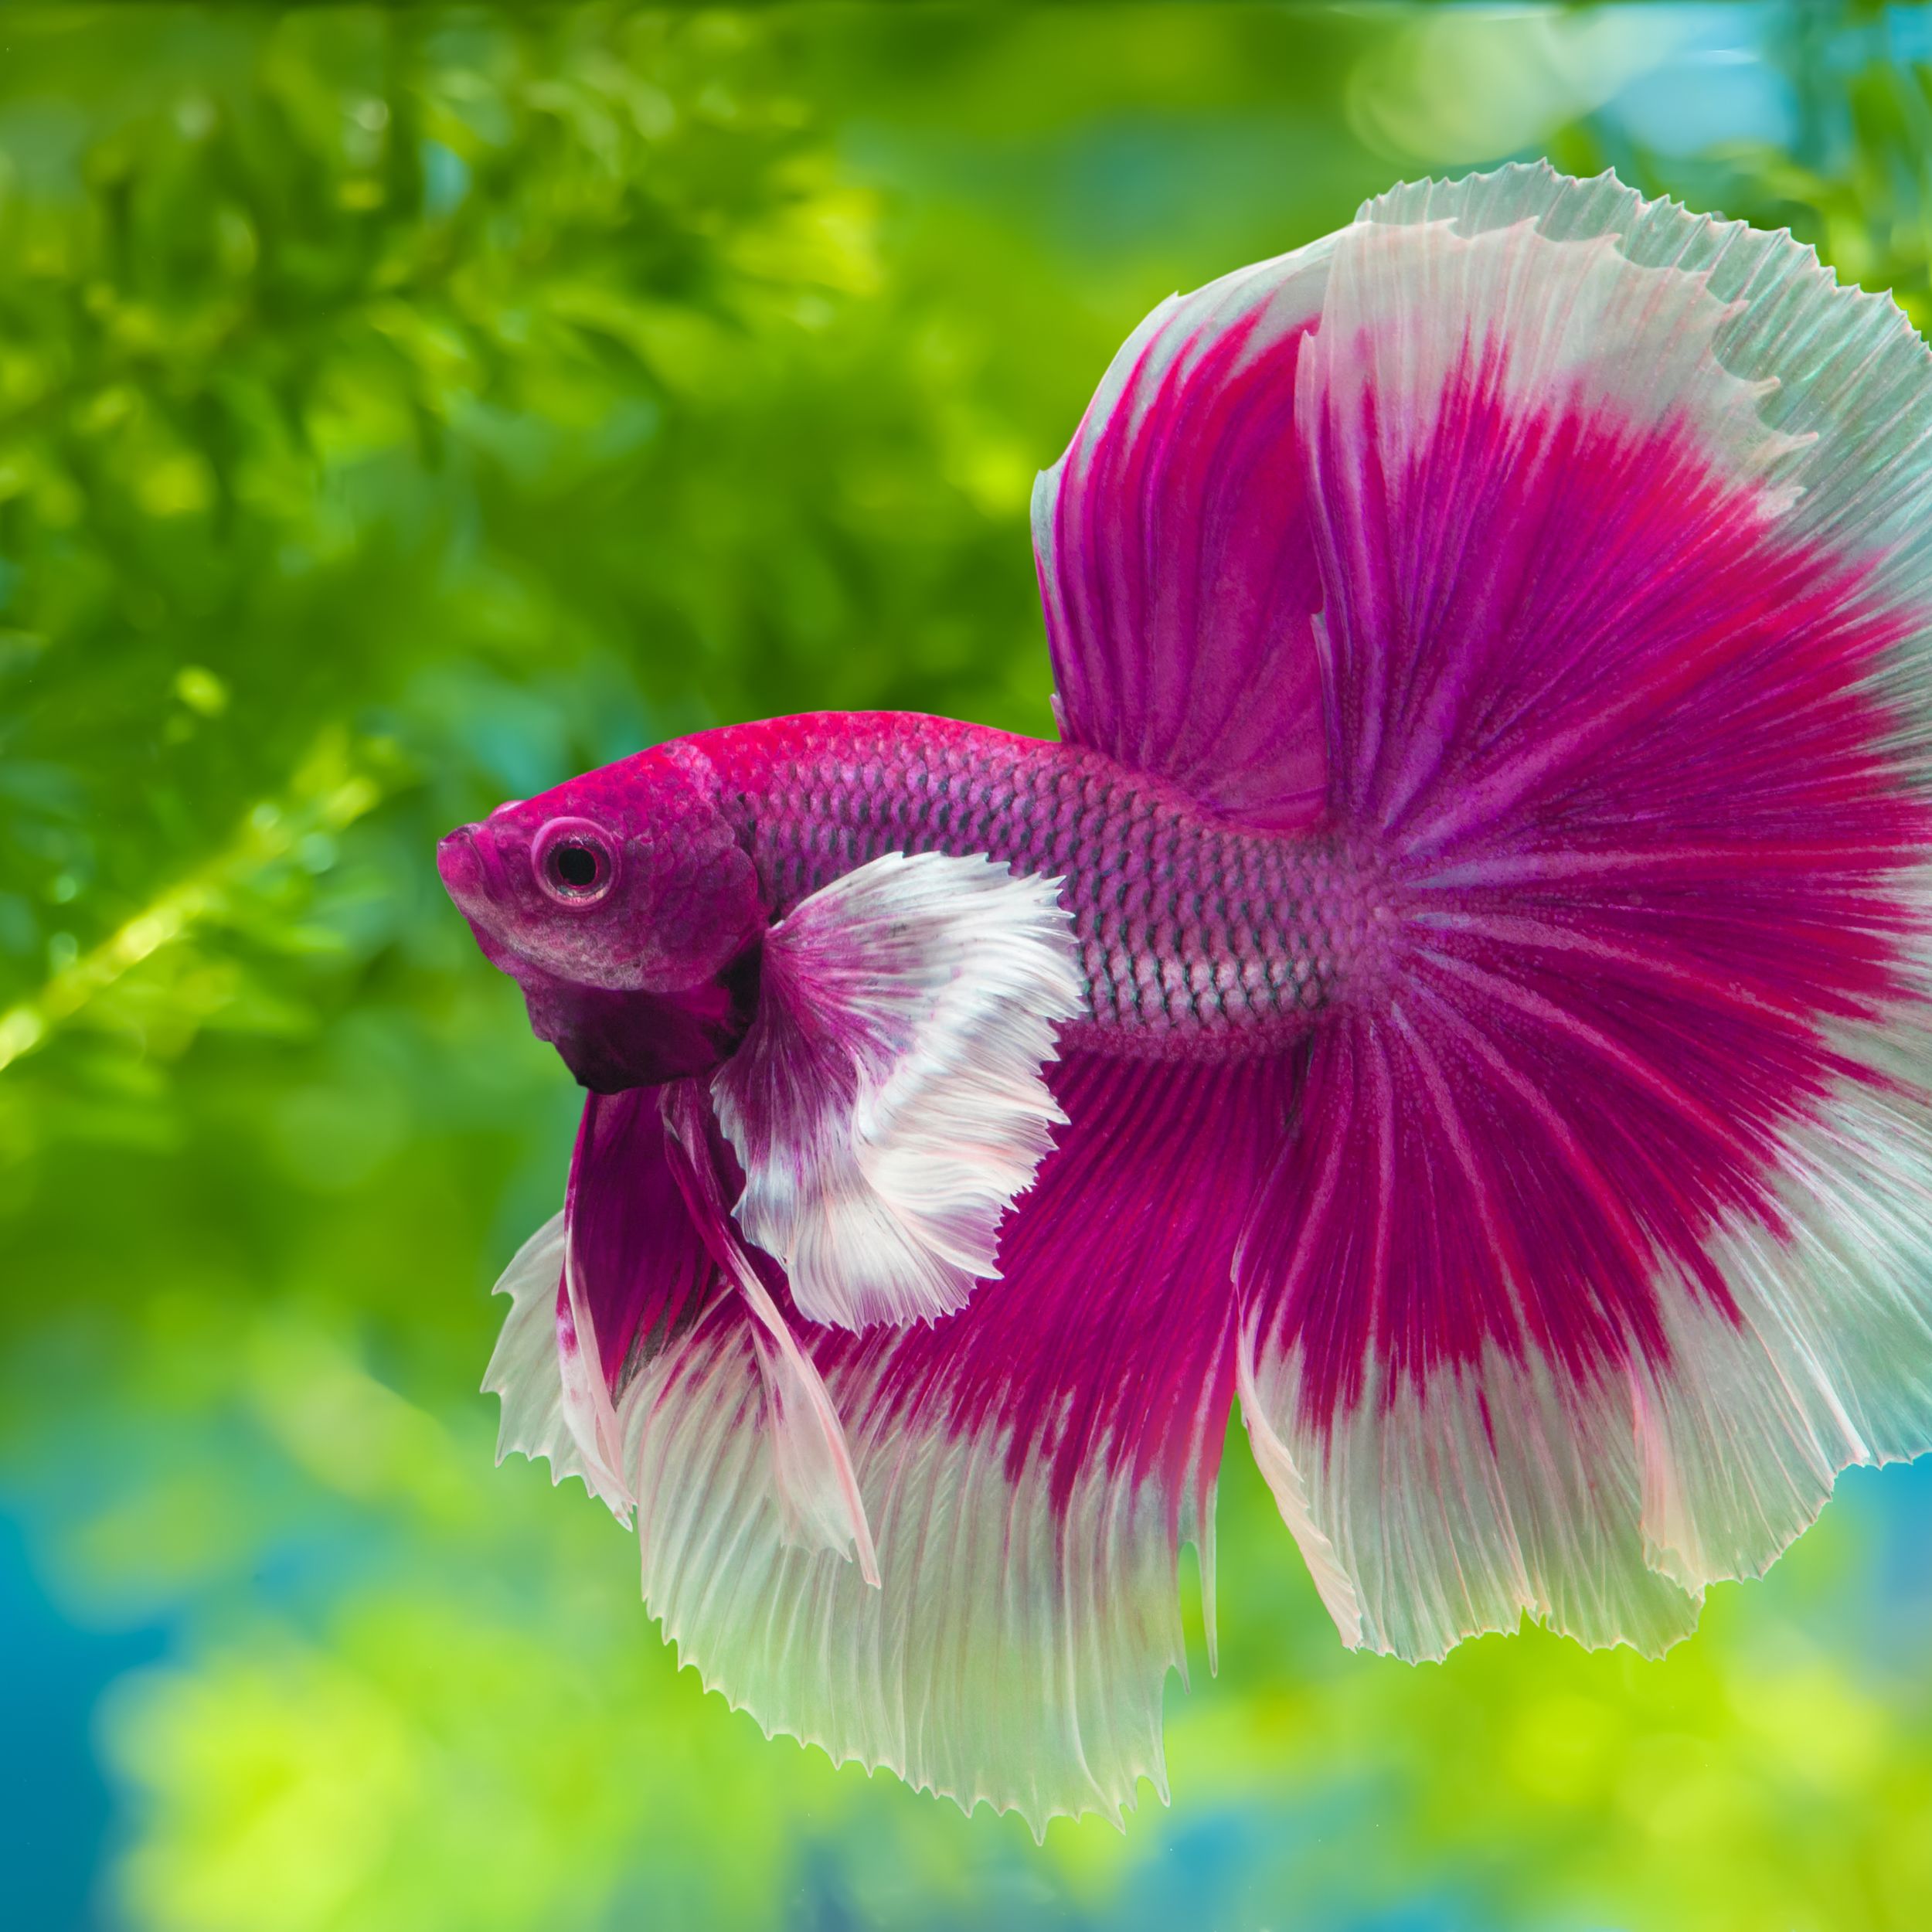 Ask Dr. Universe: A happy betta fish is an interested betta fish